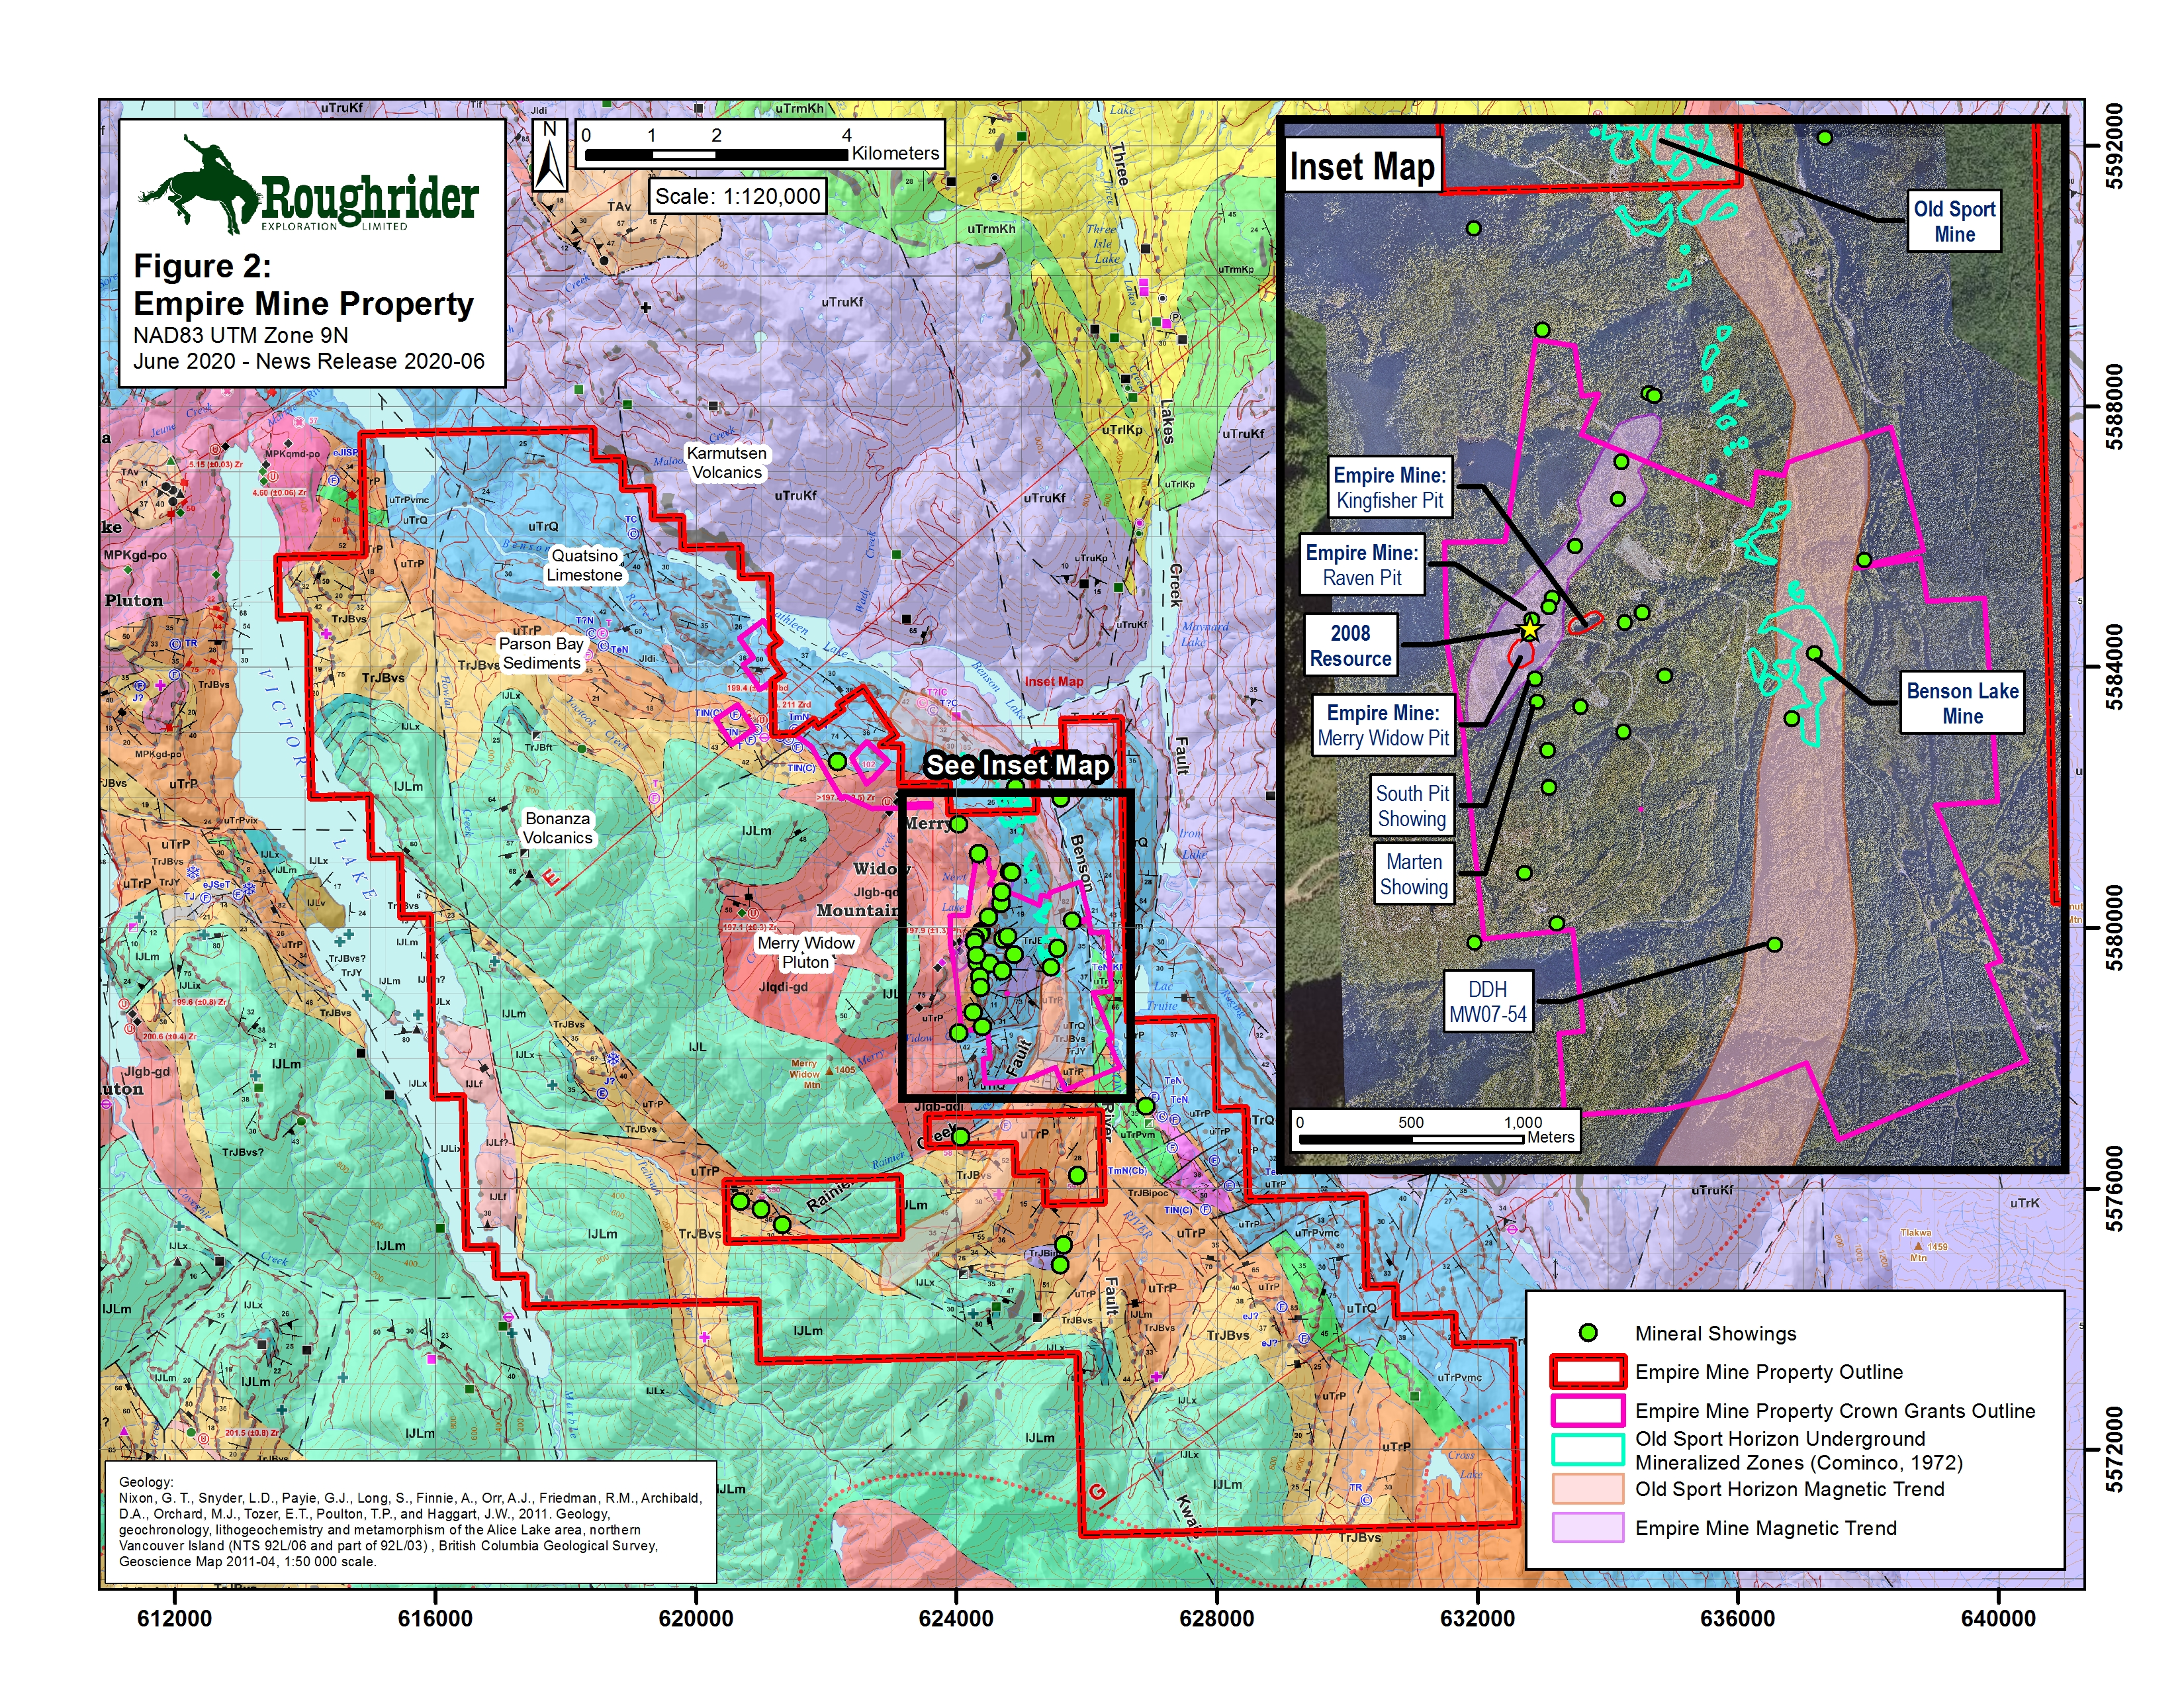 Roughrider Exploration Limited, Wednesday, June 24, 2020, Press release picture